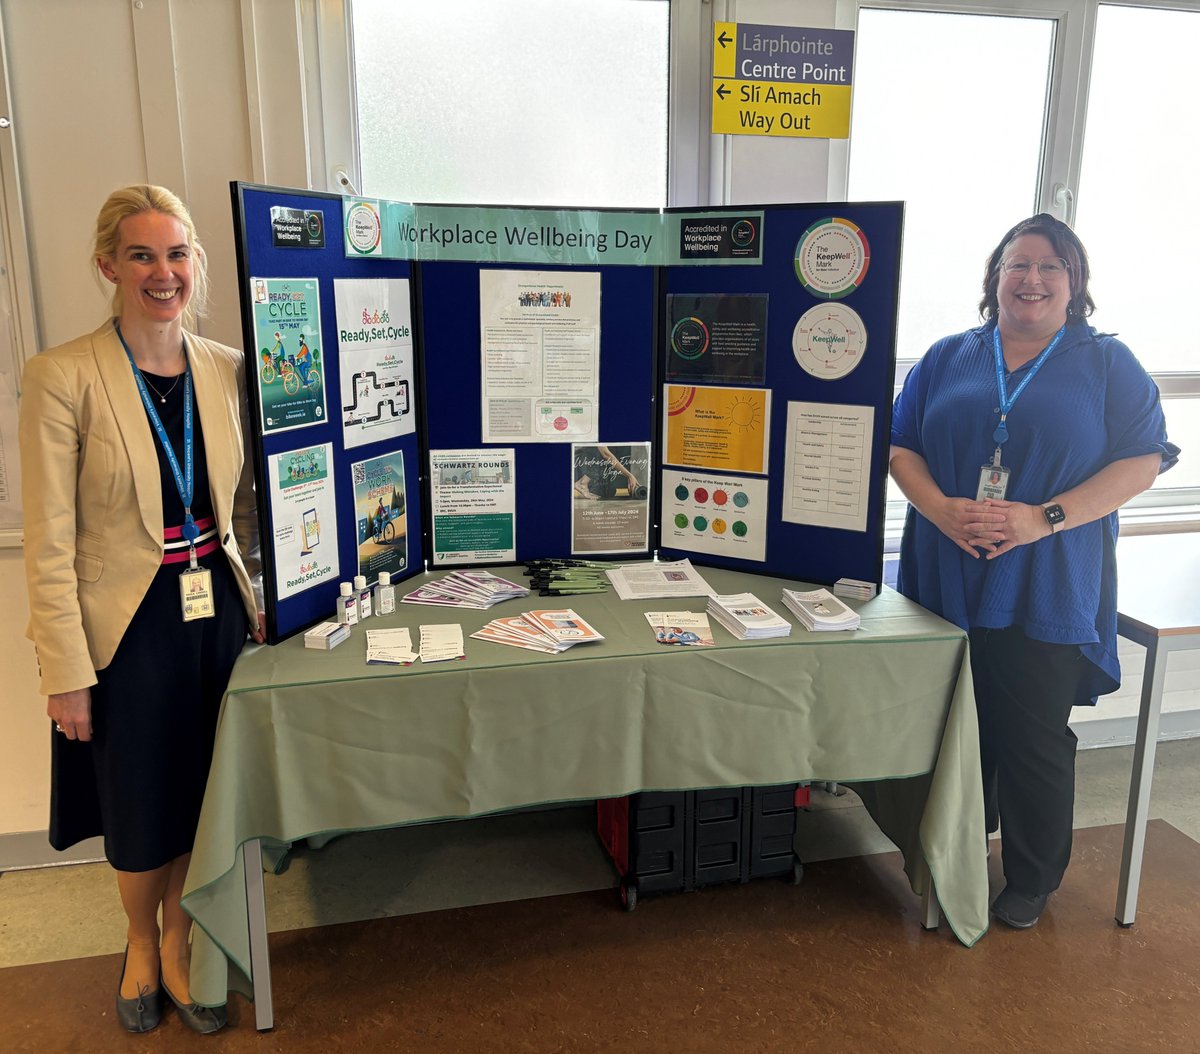 Celebrating Workplace Wellbeing at #SVUH! Last Friday, we highlighted the importance of prioritising health & wellness in the workplace. From achieving IBEC’s Keep Well Mark to our ongoing Preventive Medicine initiatives, we're committed to staff wellbeing #workplacewellbeingday